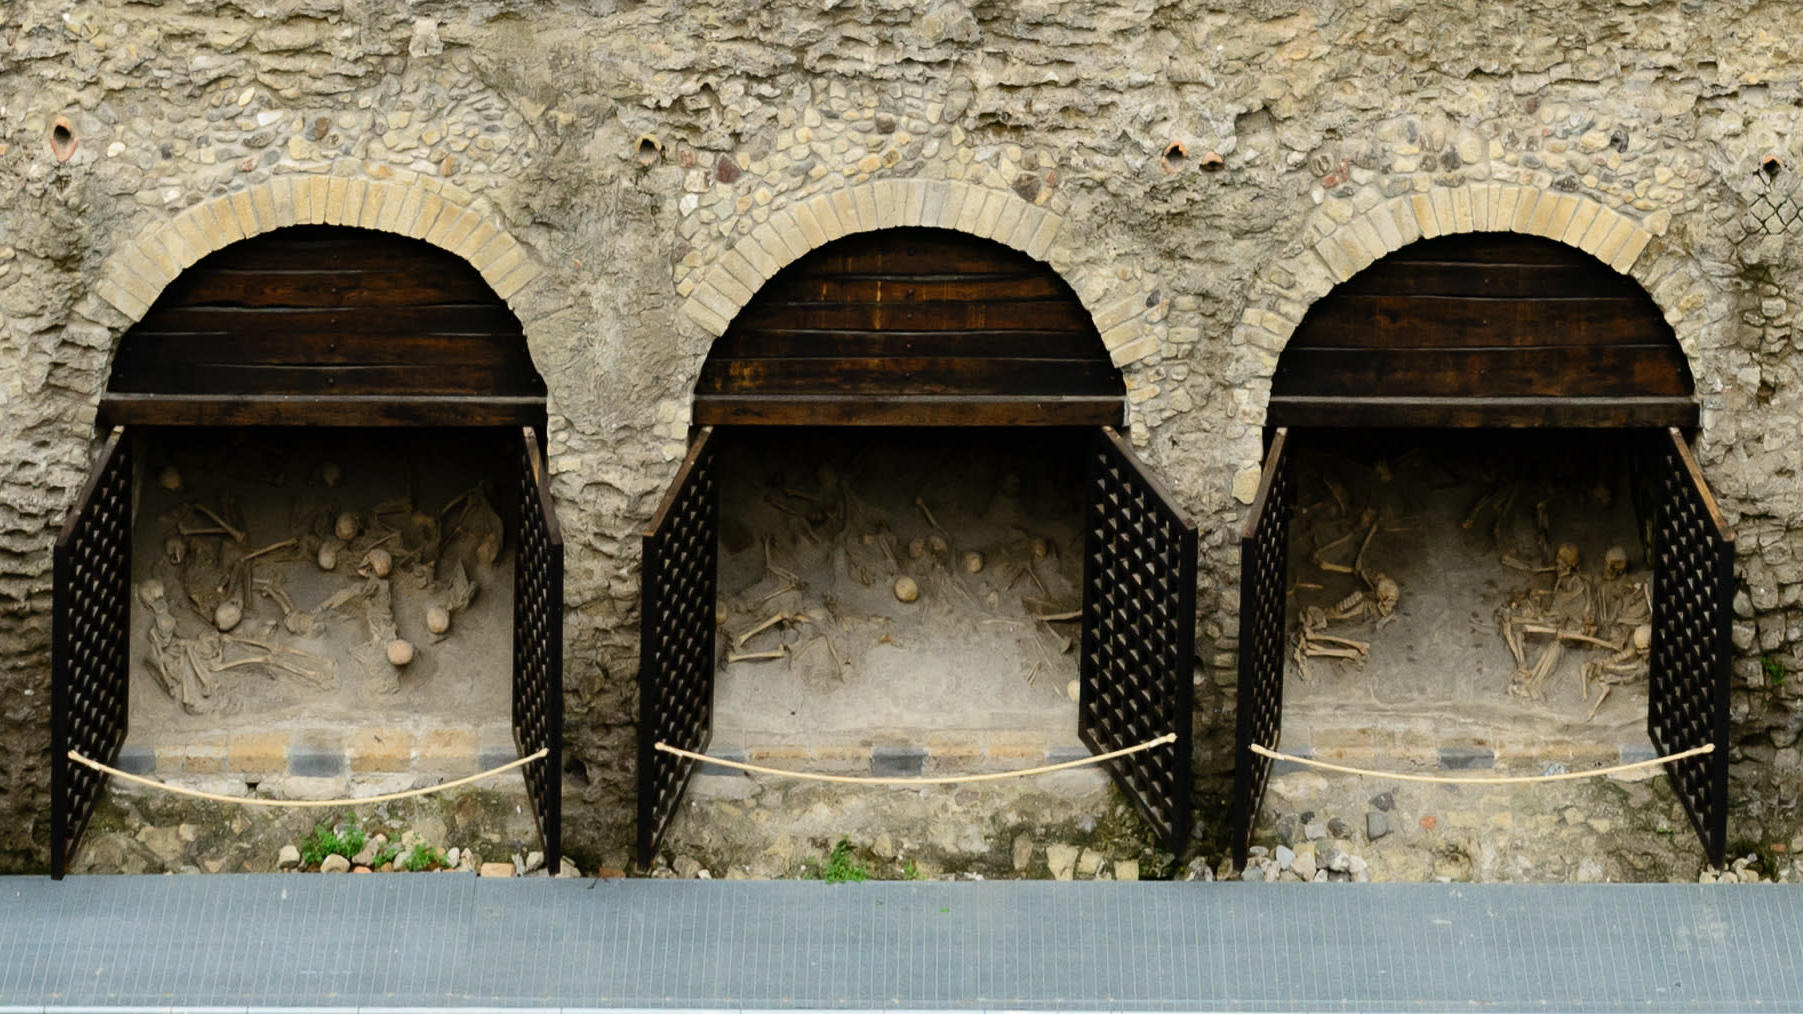 Three of 12 boat chambers at Herculaneum, with skeletons inside. (Image: Norbert Nagel)